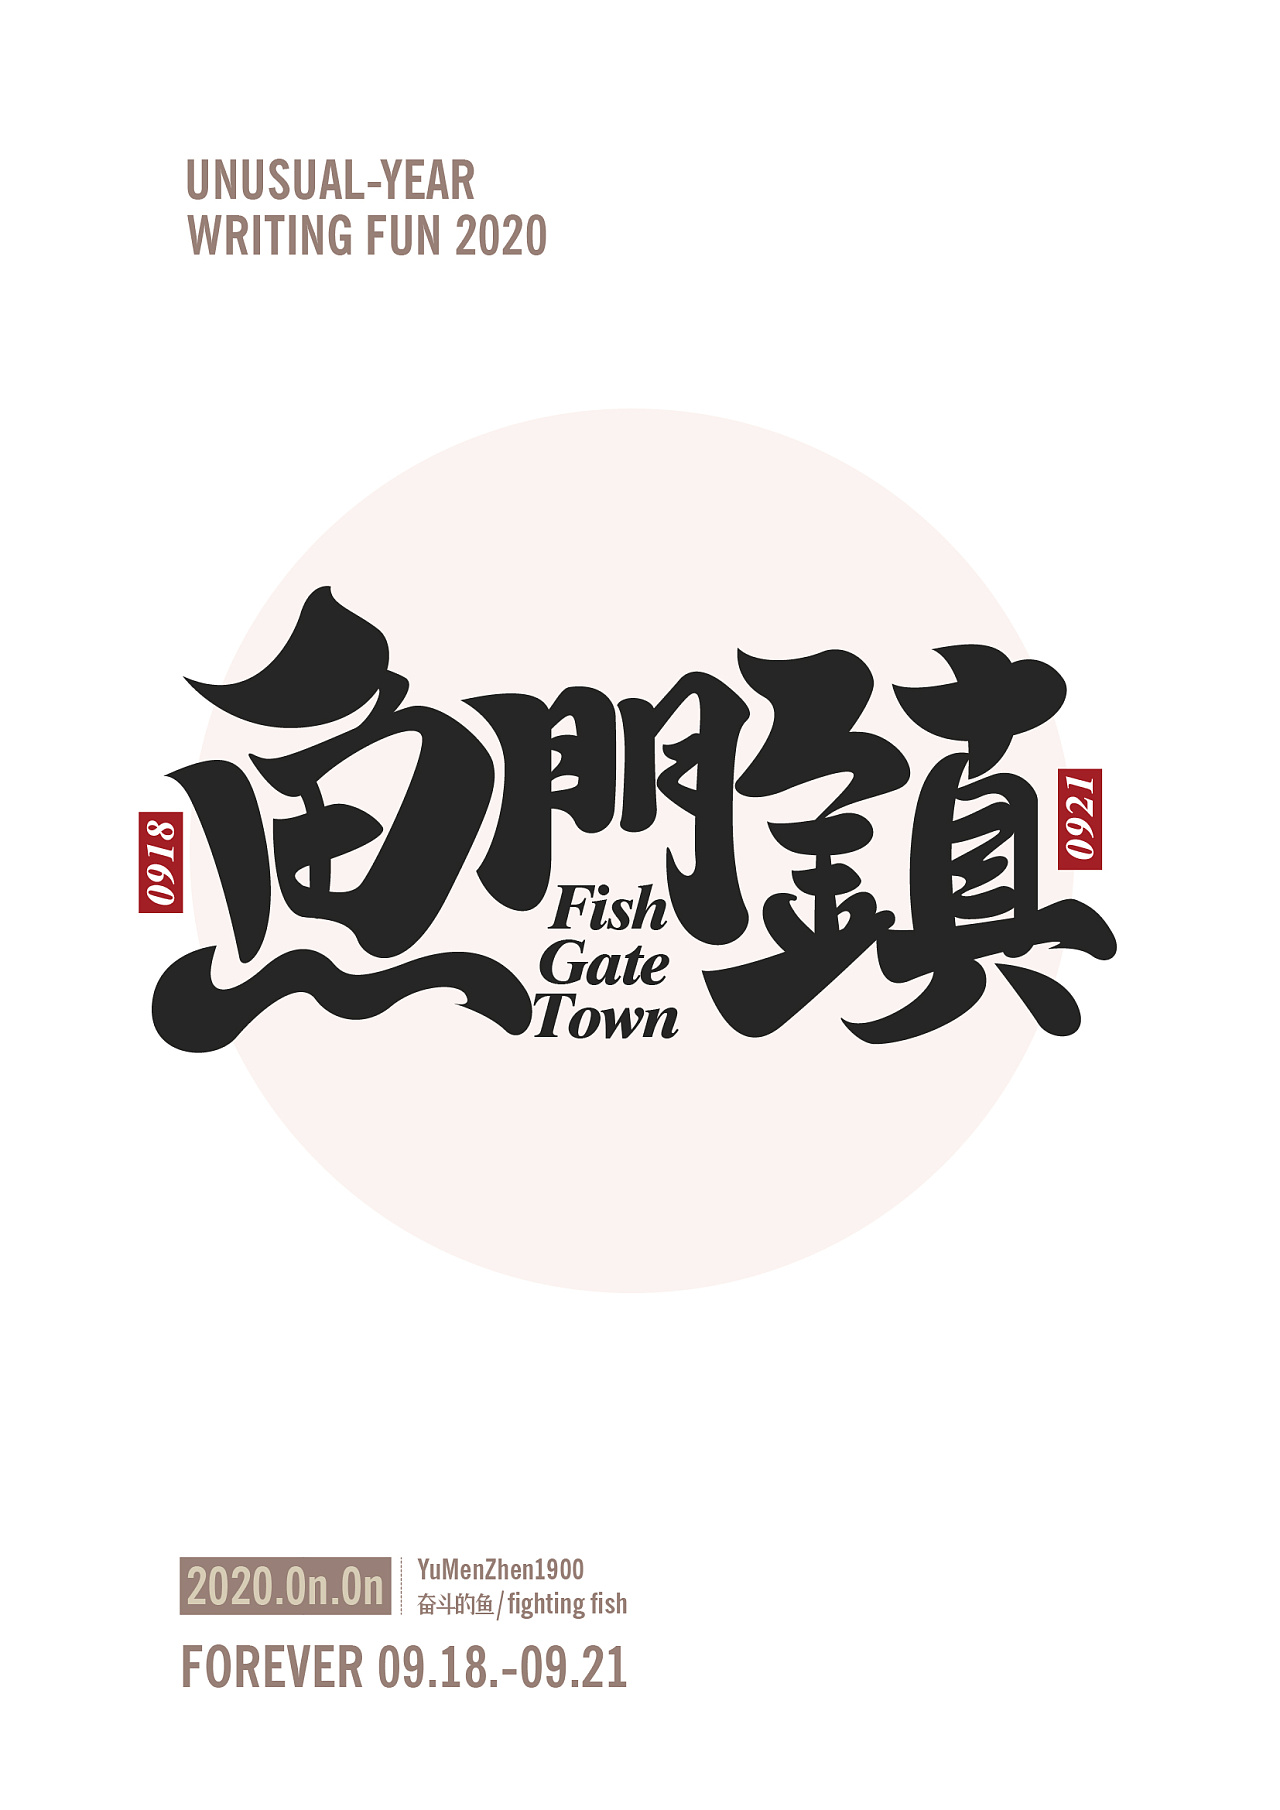 download chinese font for illustrator